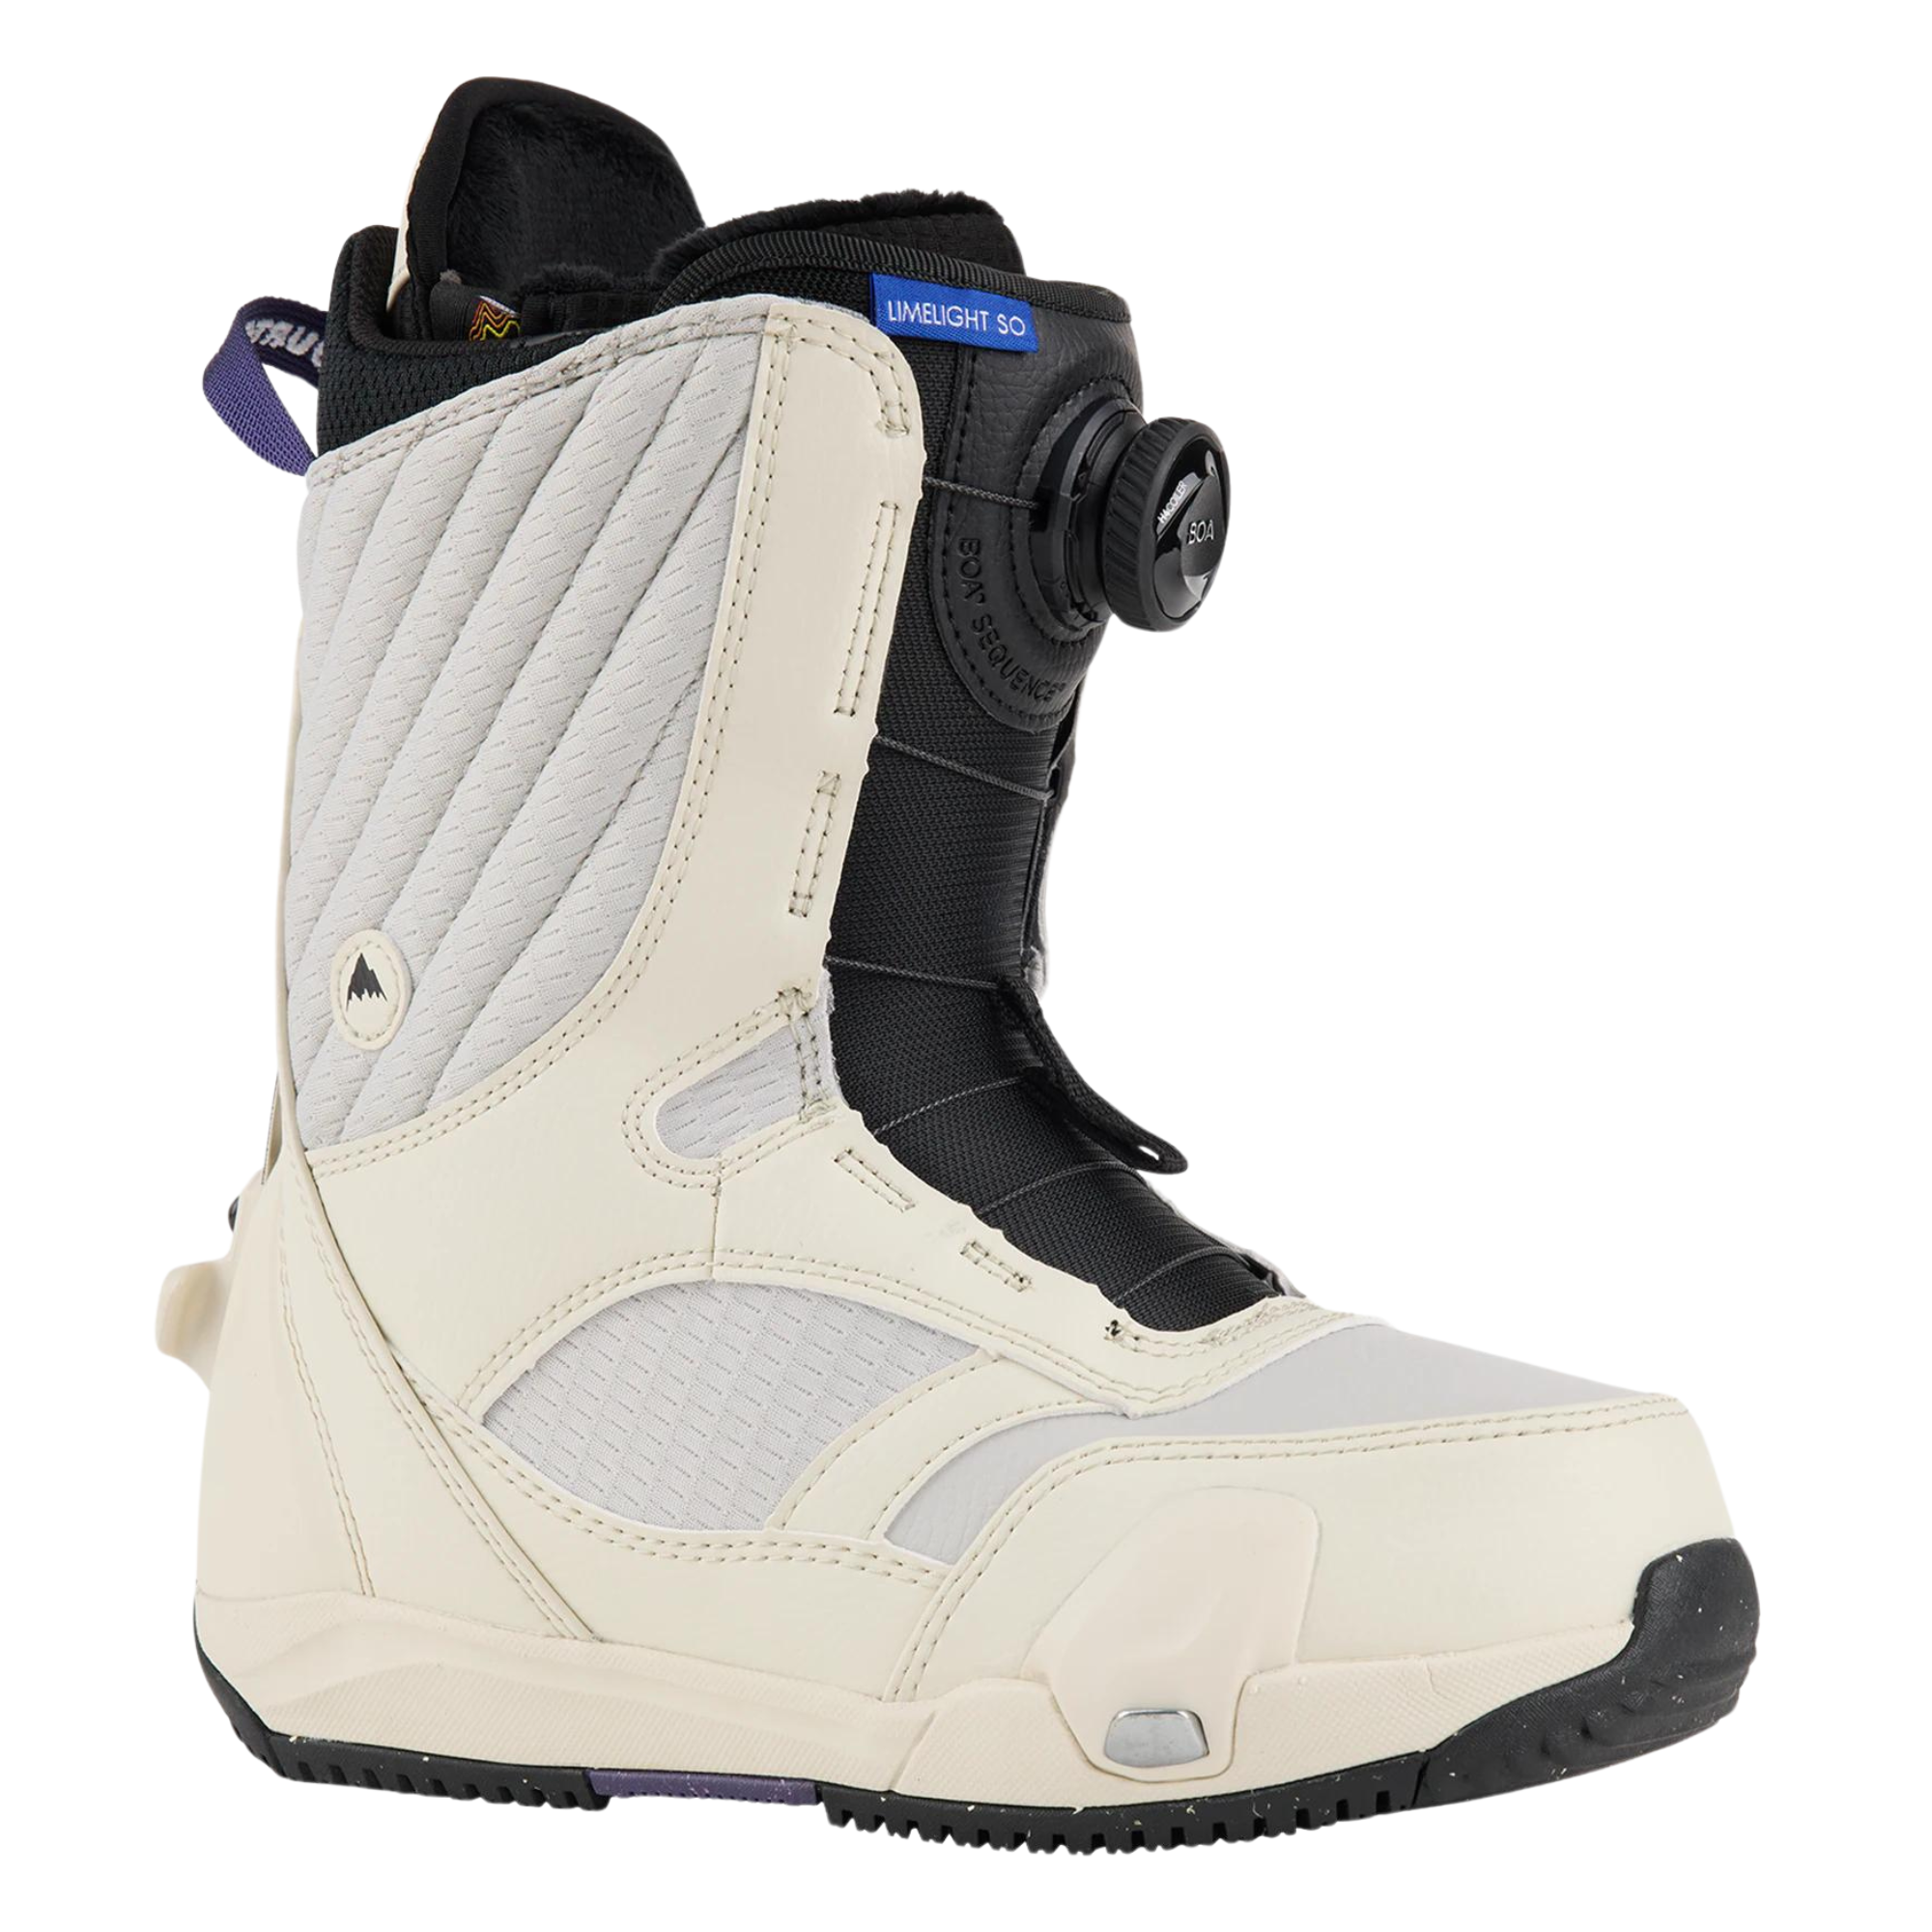 Women's Limelight Step On® Snowboard Boots - Wide - Stout White